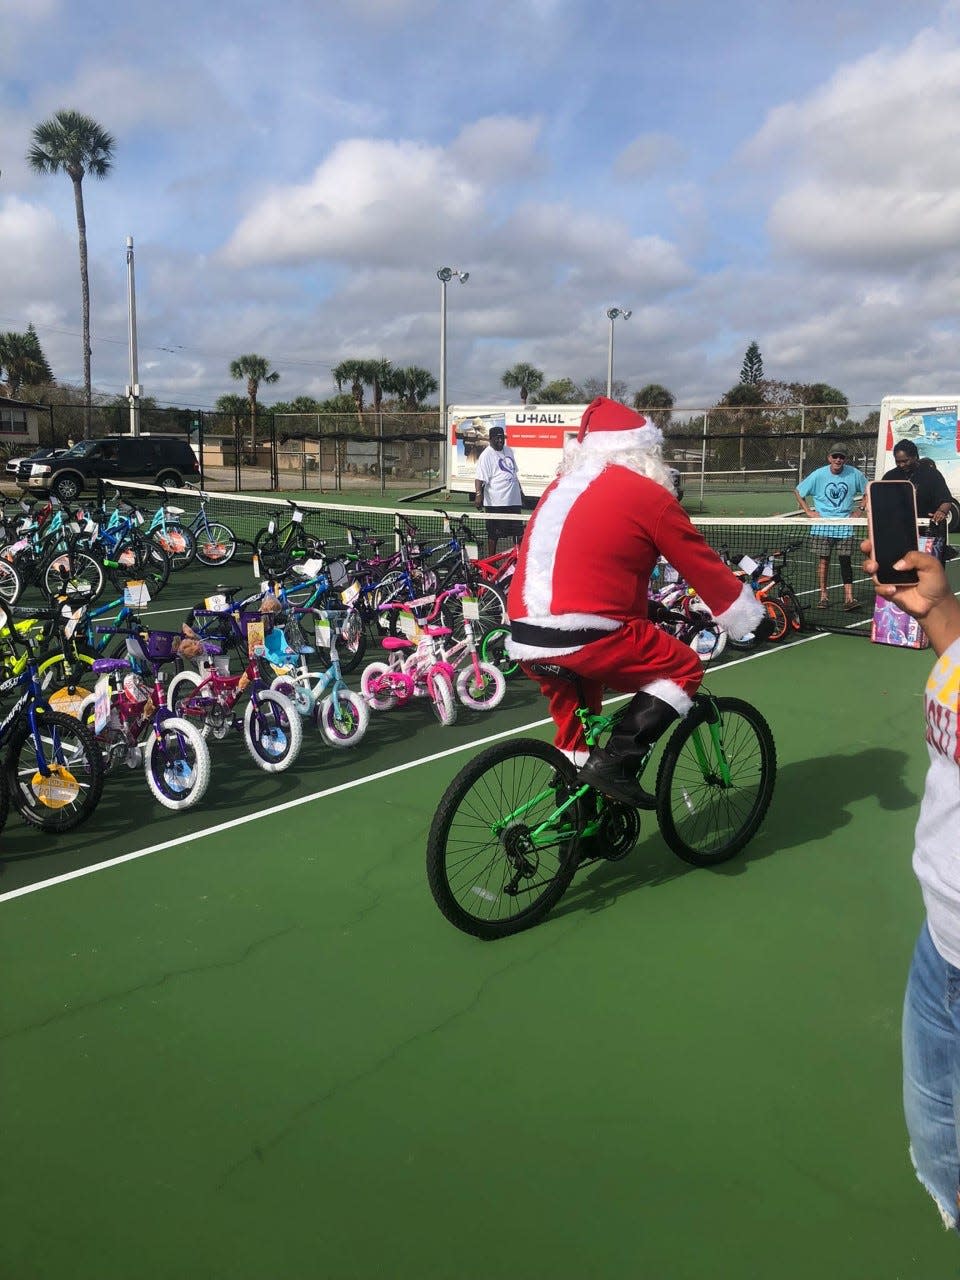 A local nonprofit has been giving away hundreds of bikes every Christmas for the past decade. This year's bike giveaway for kids will be held Dec. 17 at Daytona Beach's Derbyshire Park.